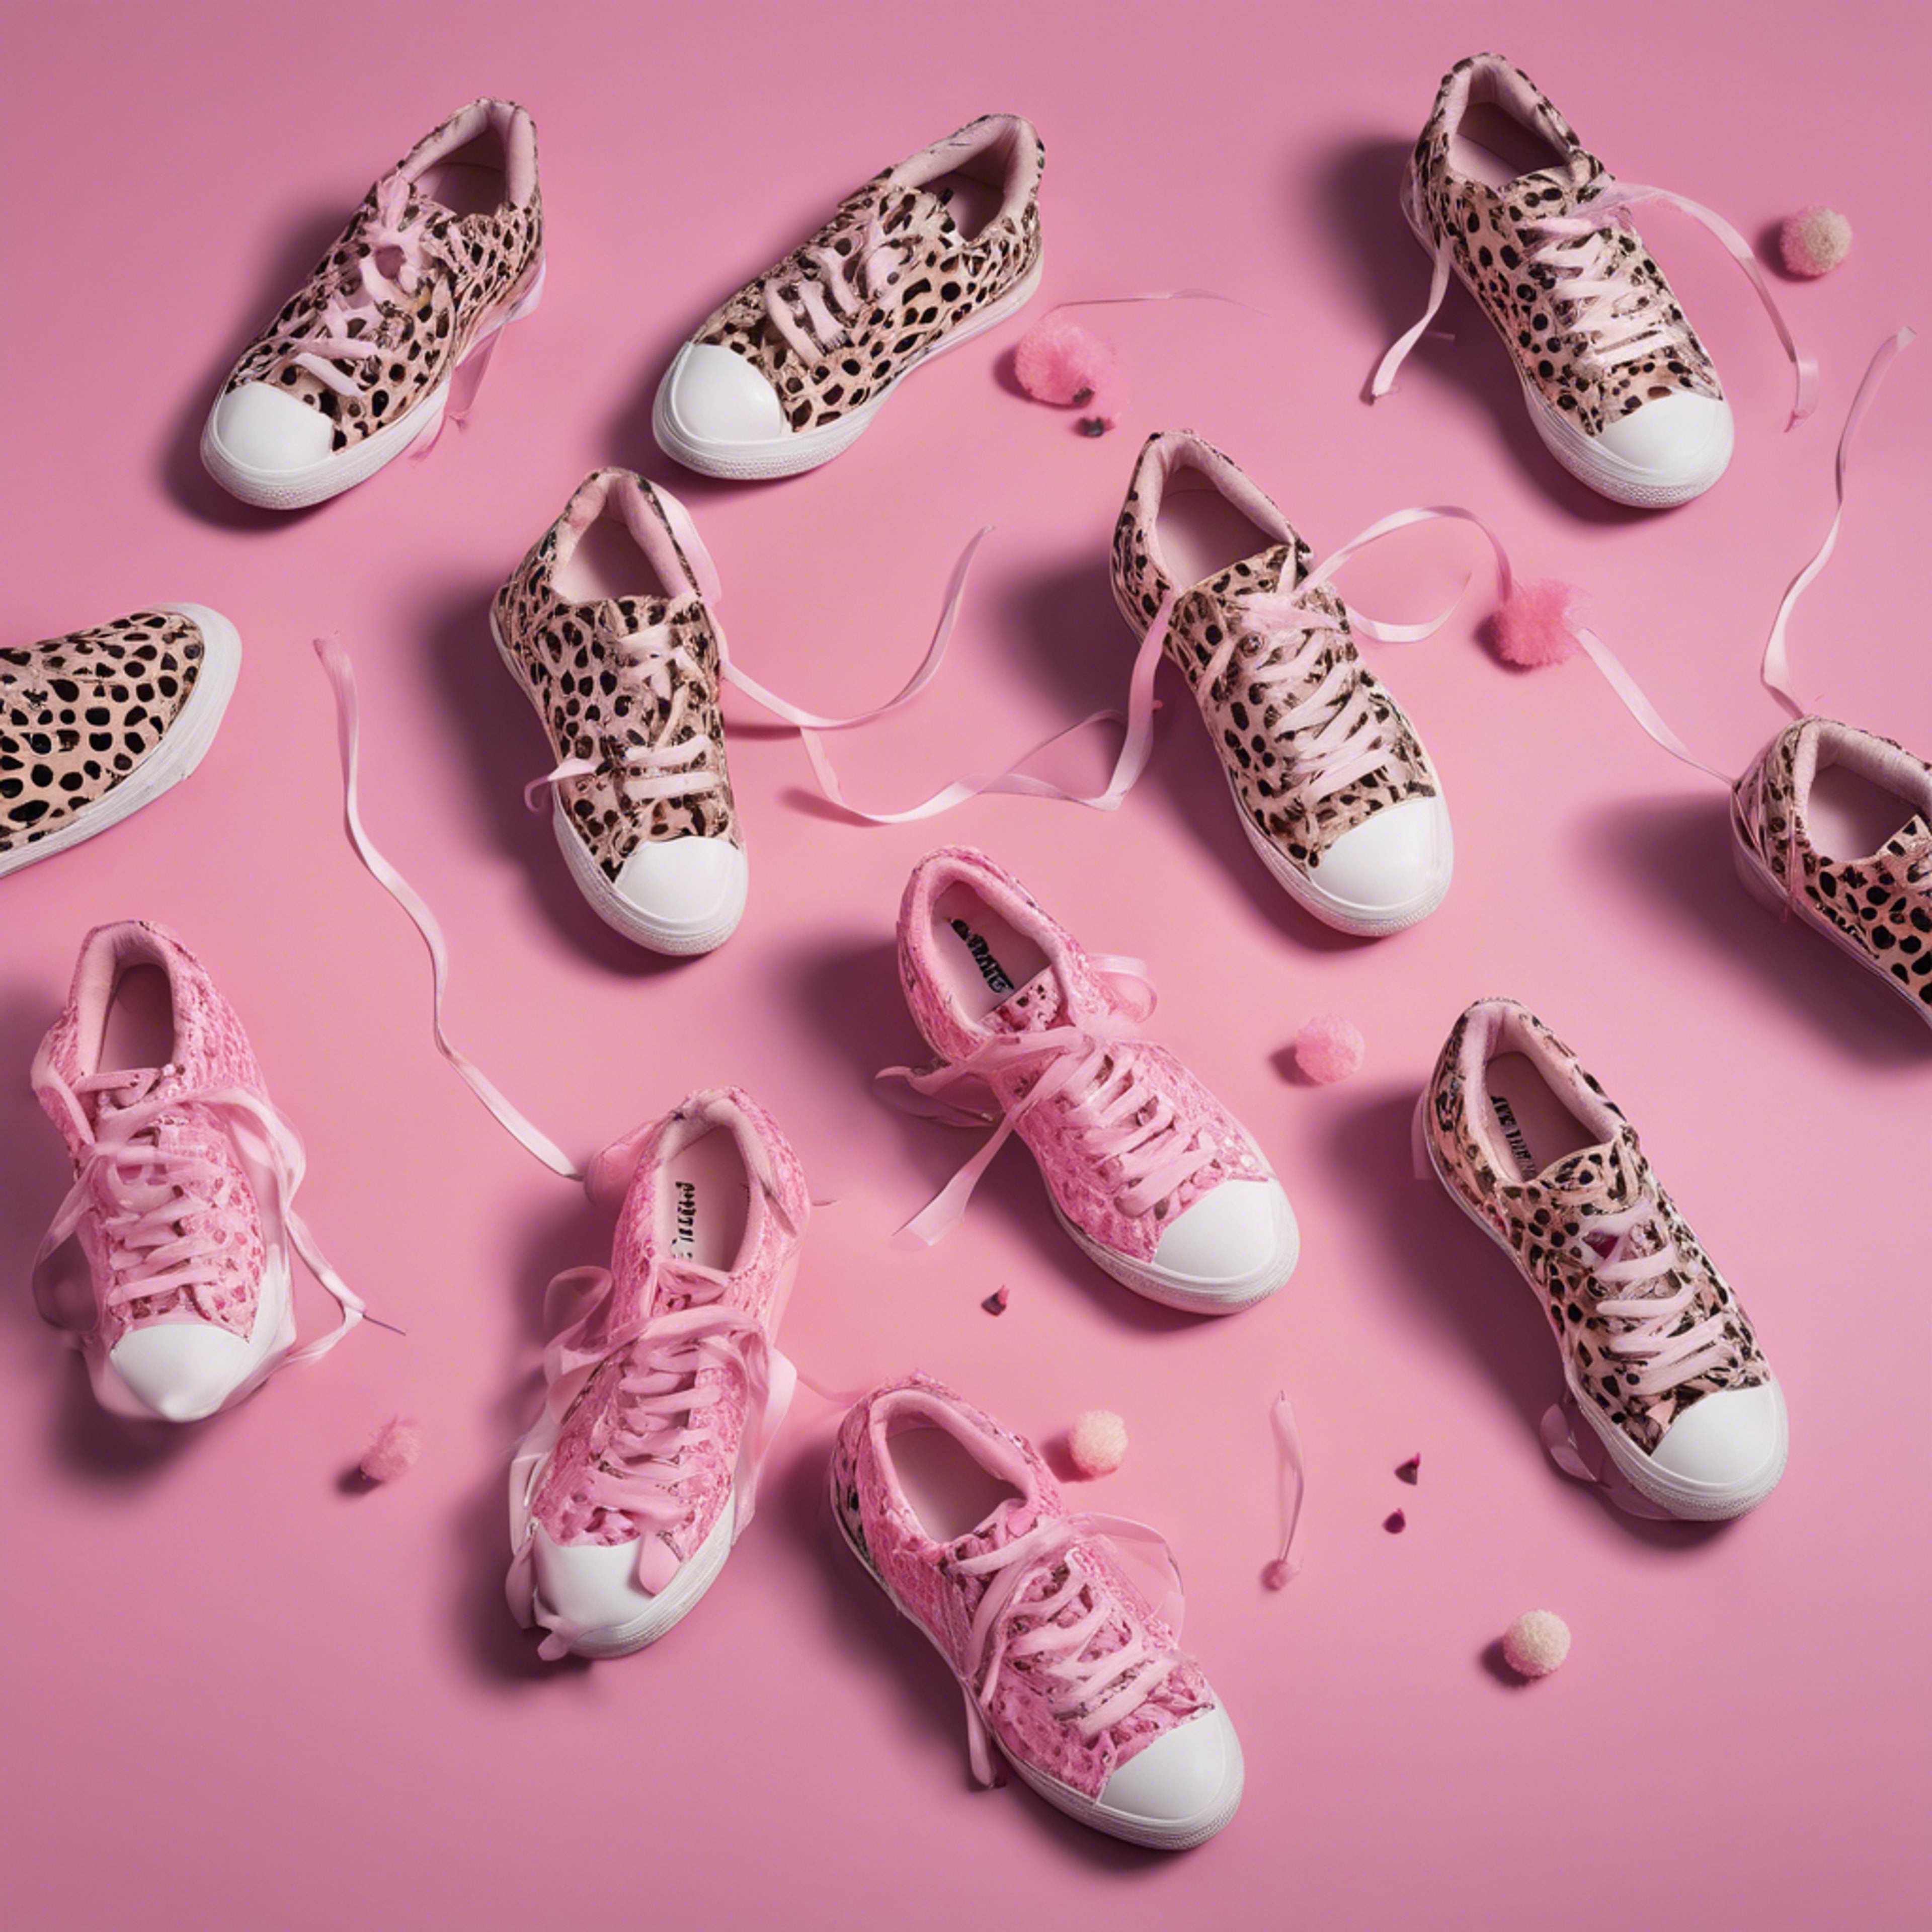 An aerial view of a pair of tennis shoes with a girly pink cheetah pattern. Tapetai[69b37b649749417cbf35]